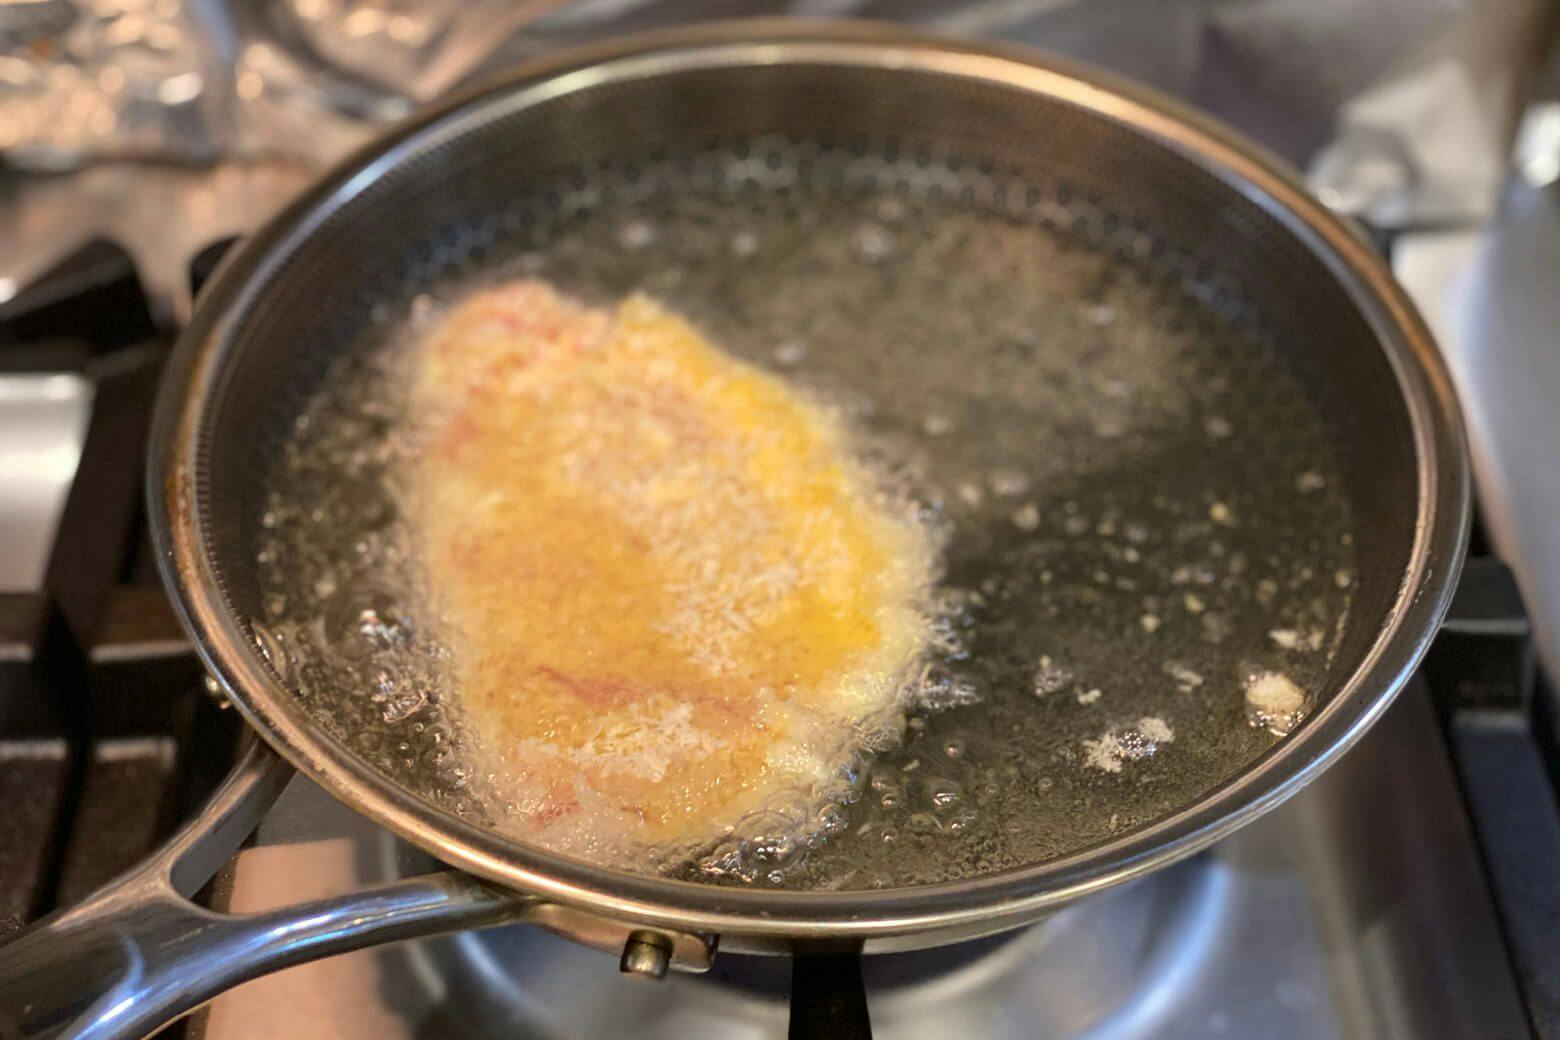 Cook in the frying oil until it turns a crispy golden color